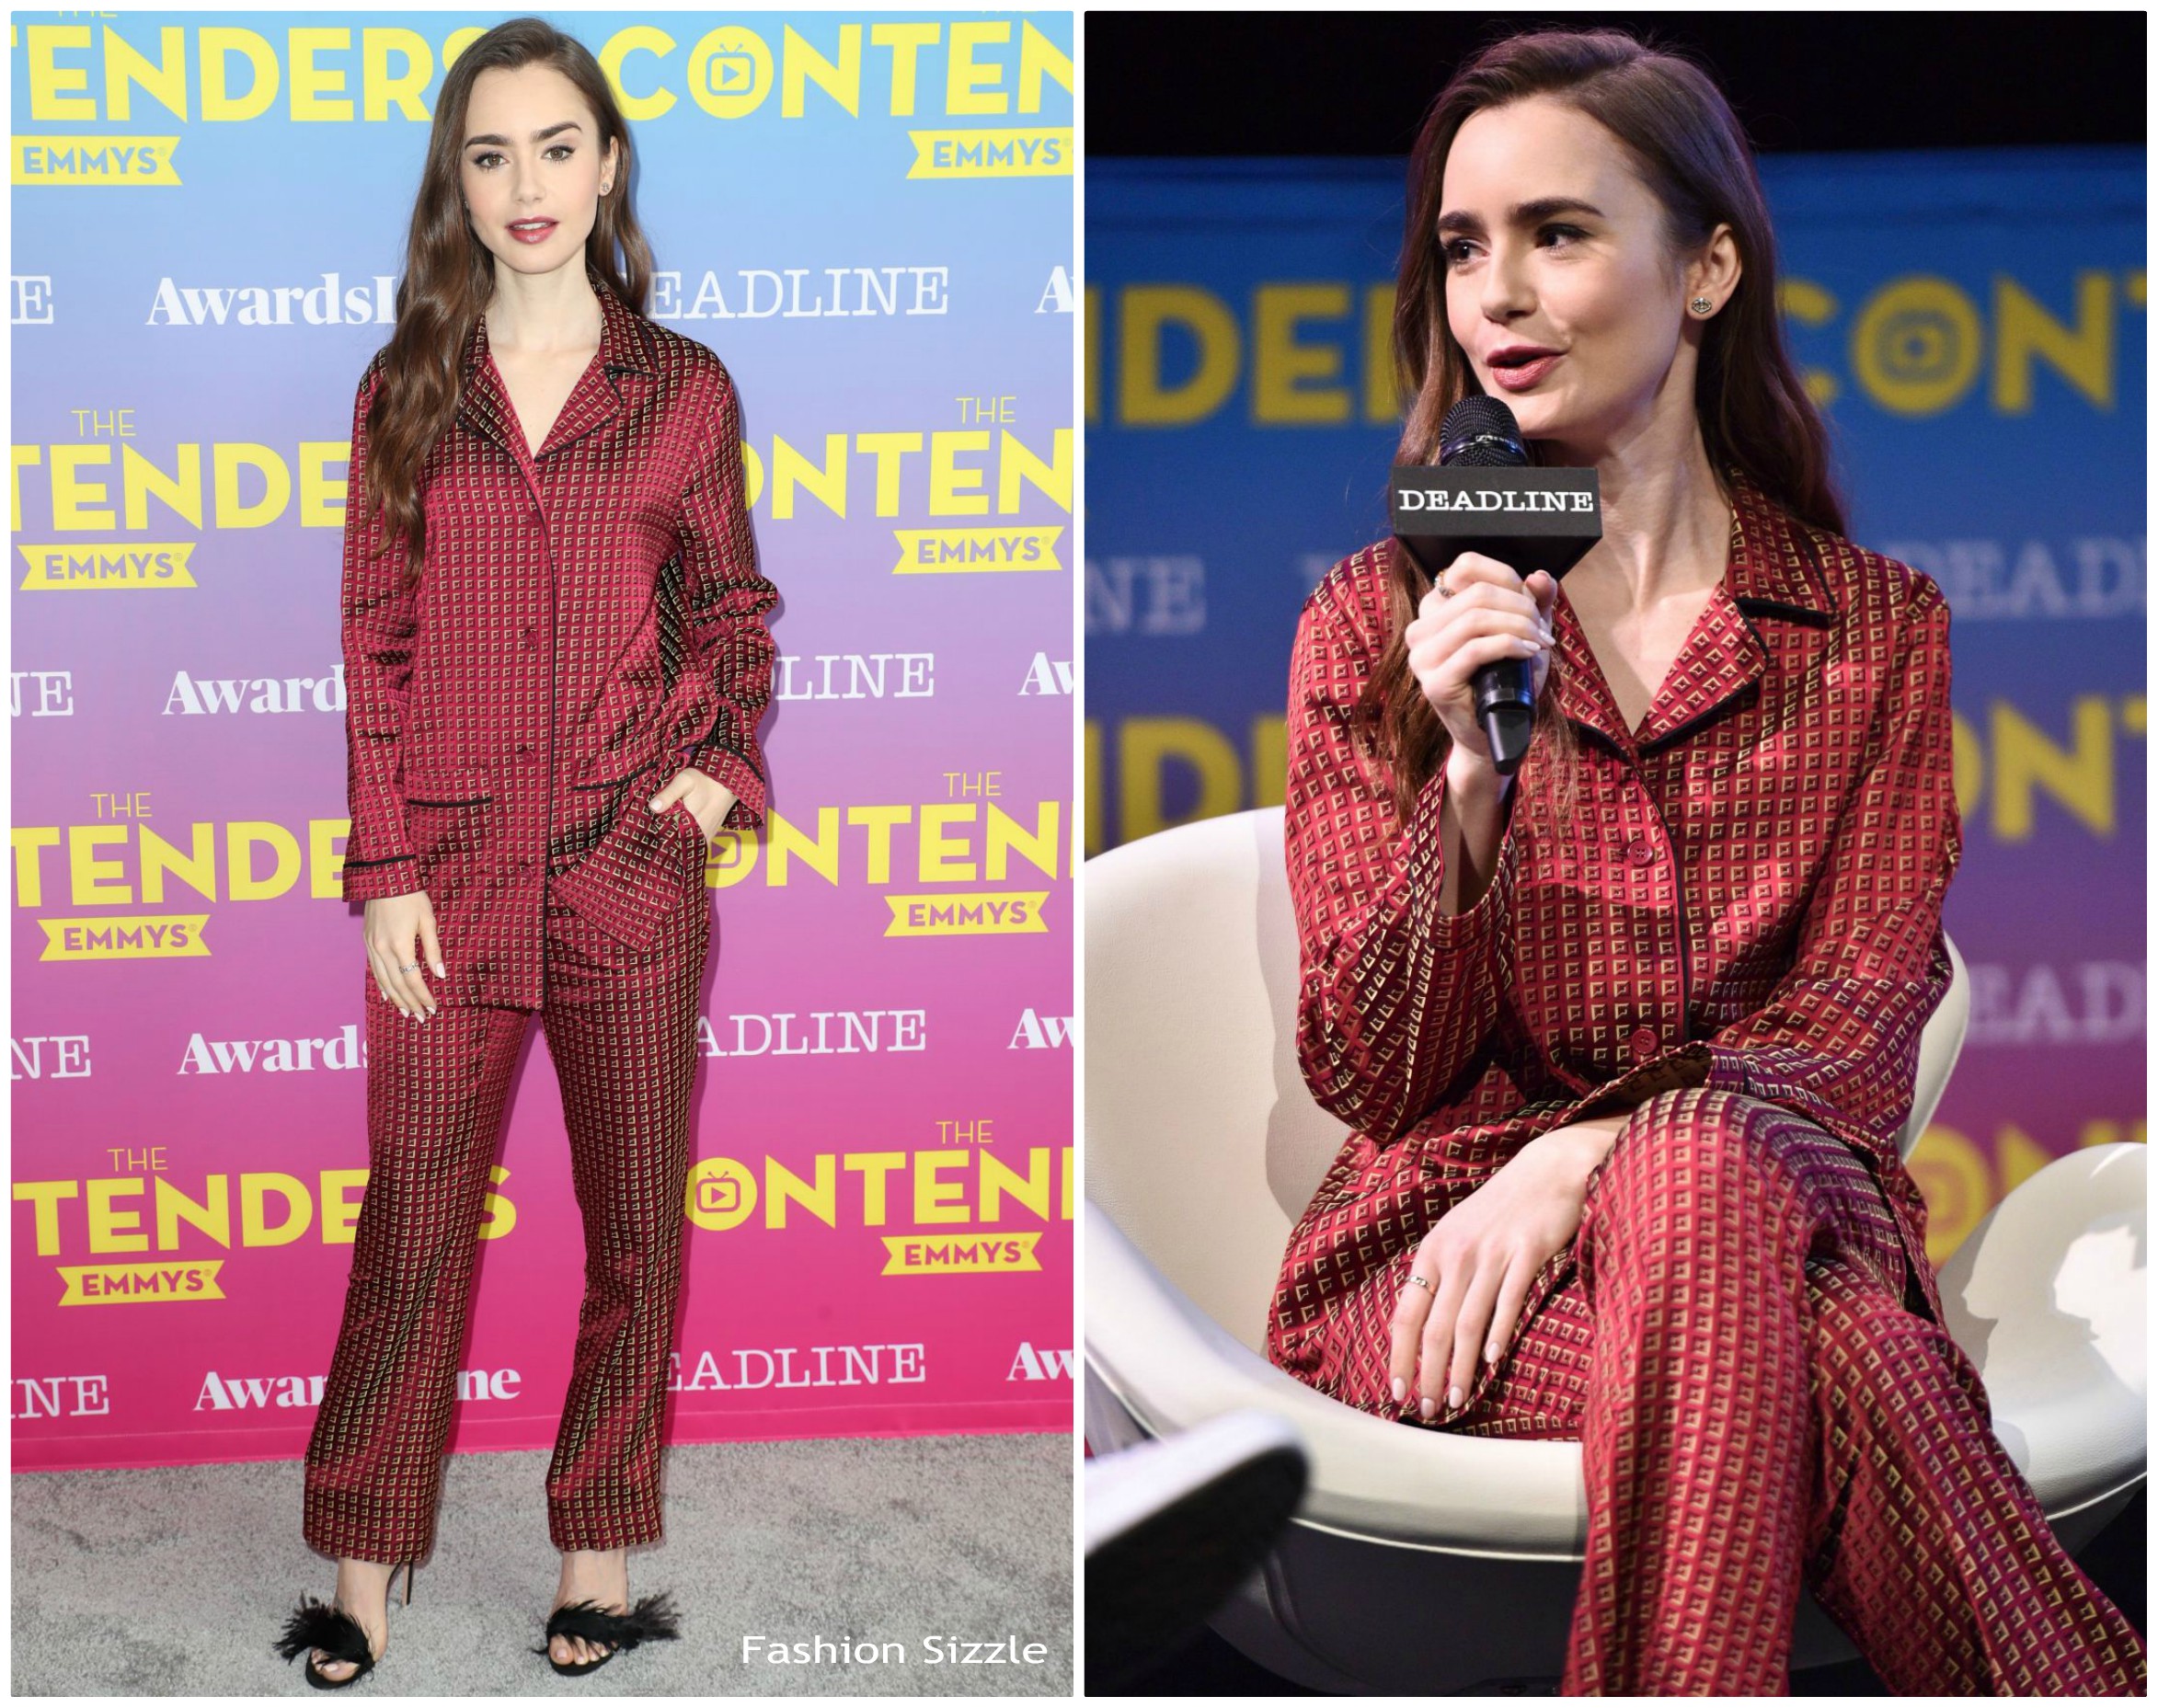 Lily Collins  In Etro @ Contenders Emmys Event In LA